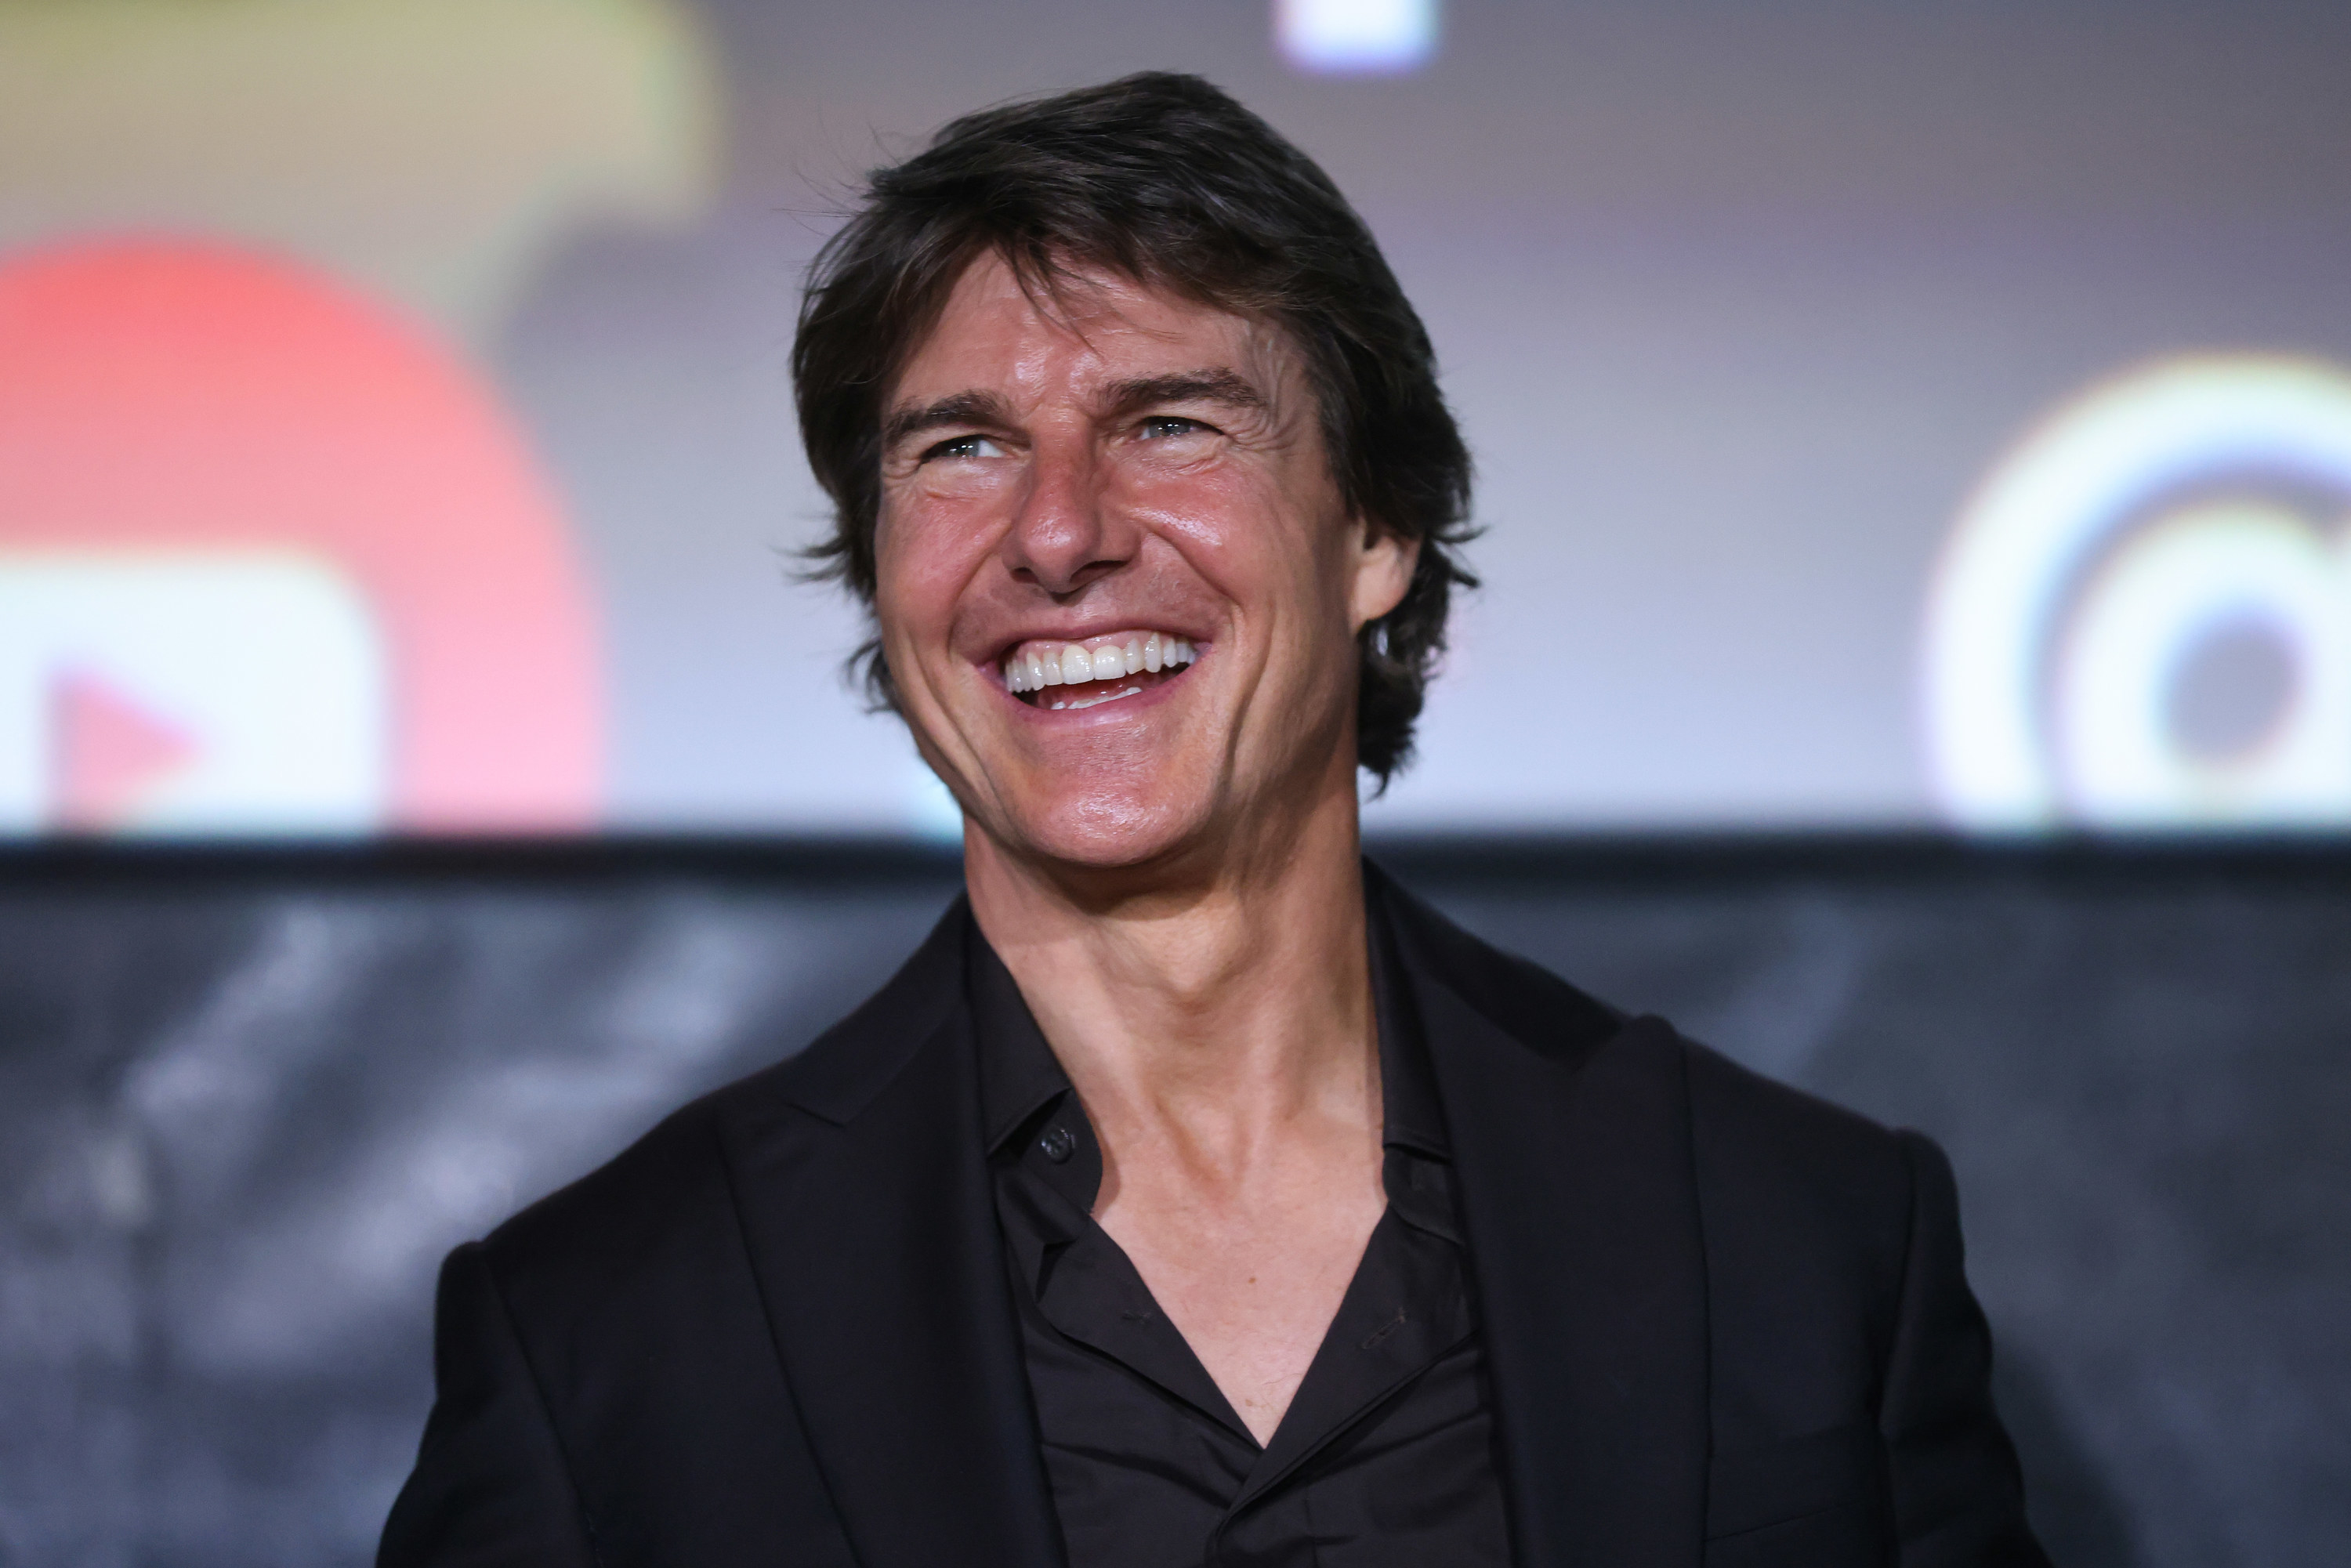 Tom Cruise smiling at the camera, his Roman nose feature is very visible